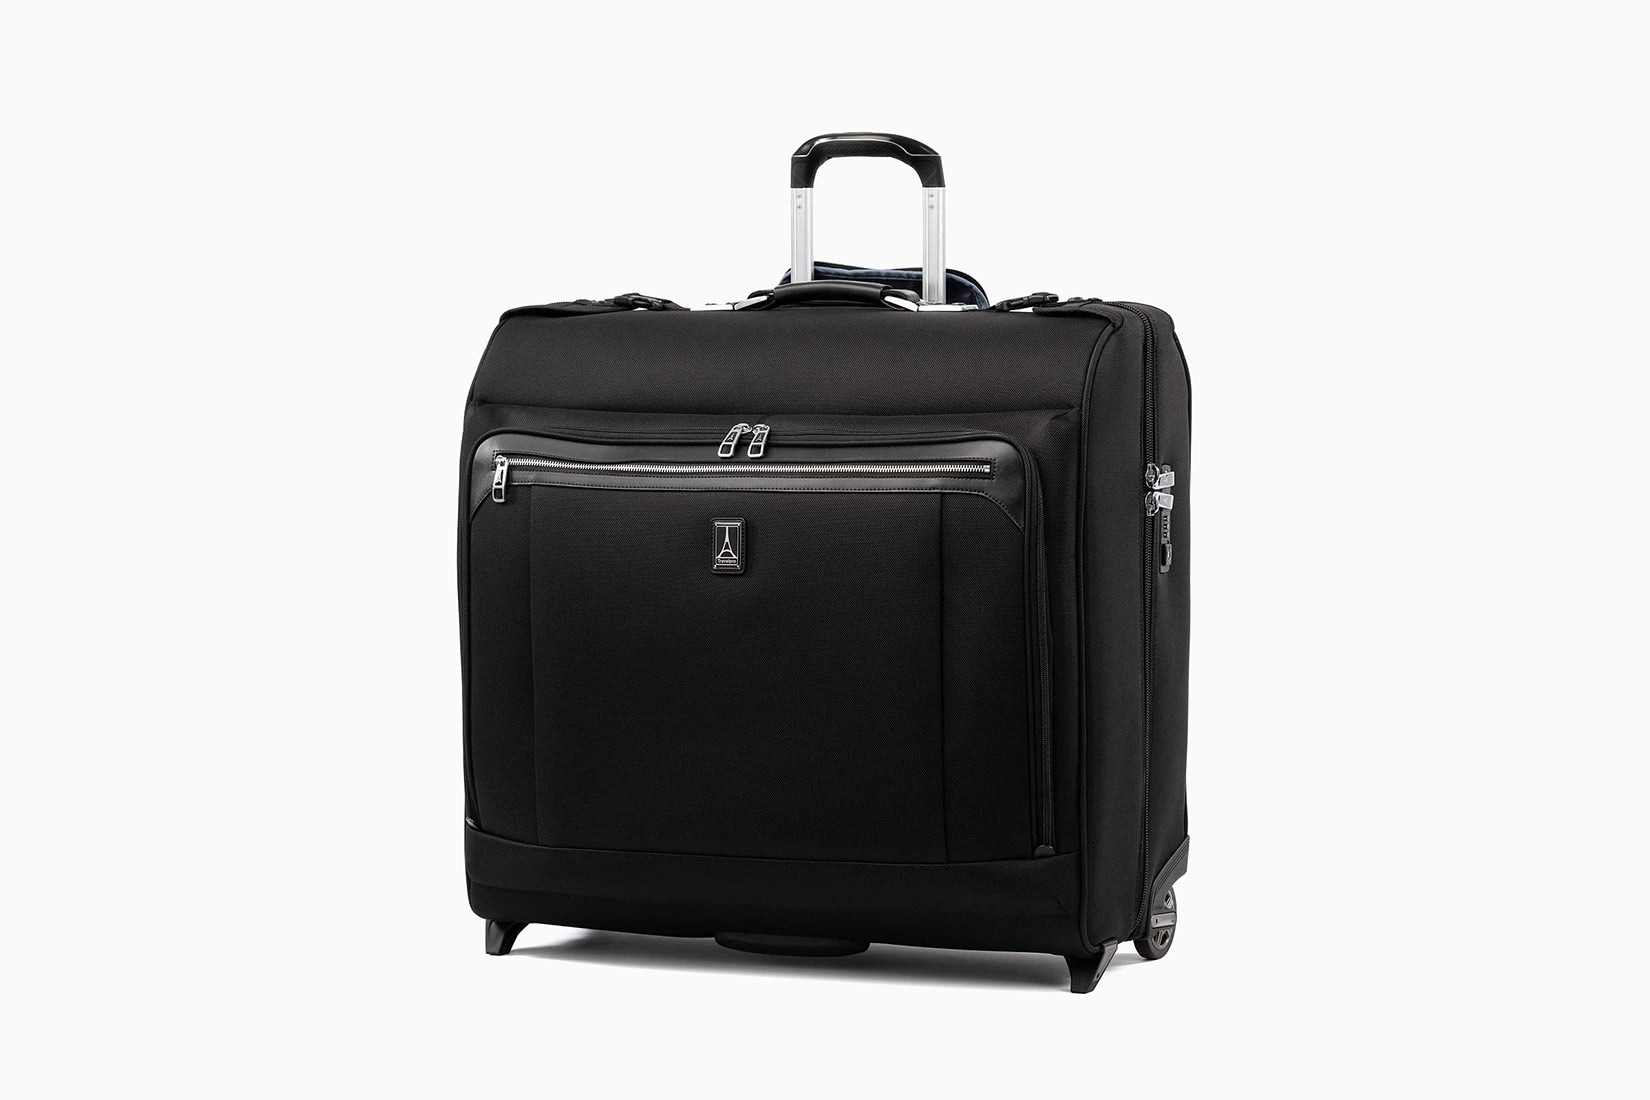 best garment bags large travelpro review - Luxe Digital